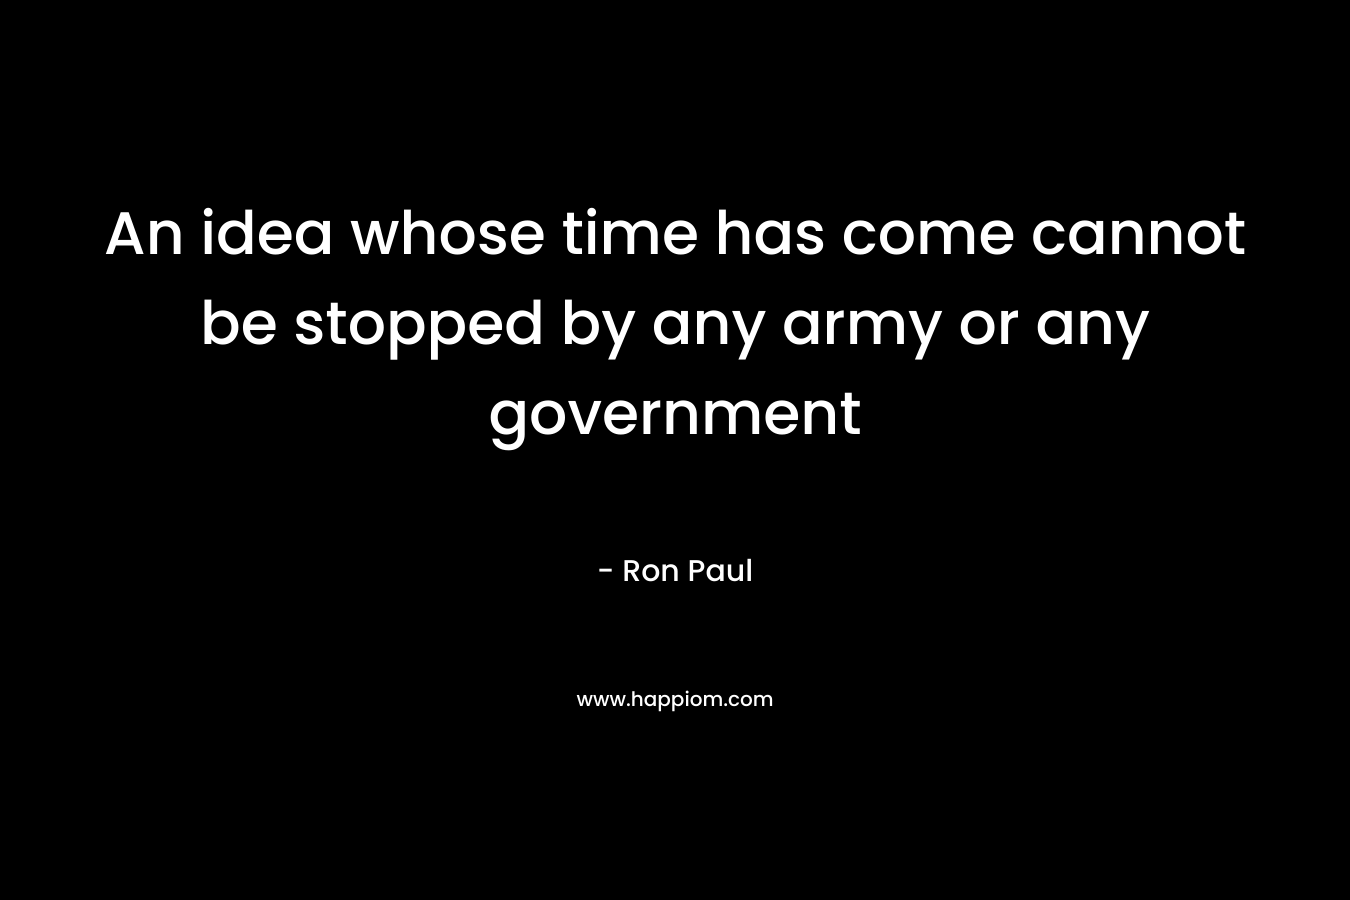 An idea whose time has come cannot be stopped by any army or any government – Ron Paul